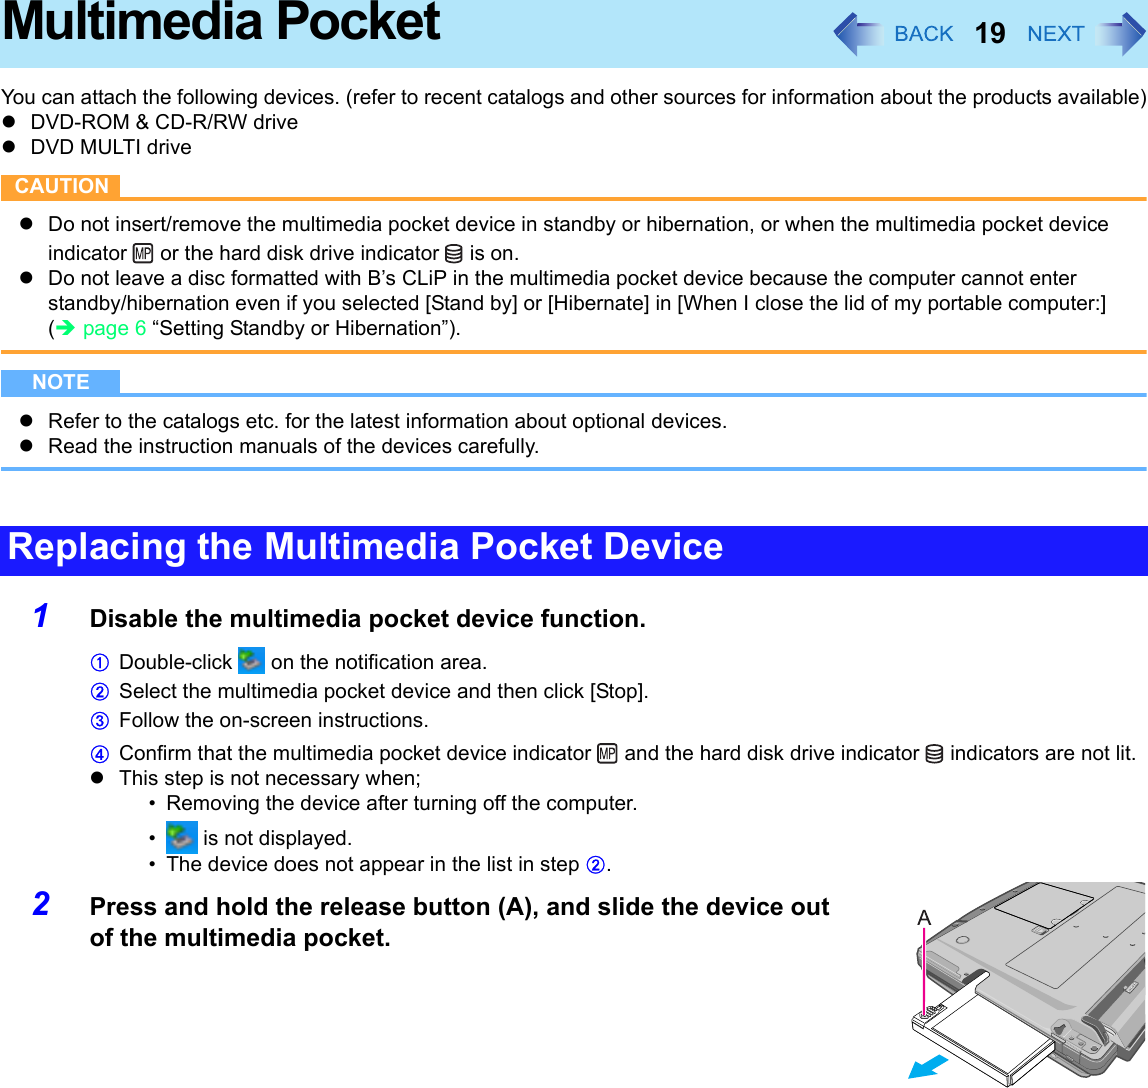 19Multimedia PocketYou can attach the following devices. (refer to recent catalogs and other sources for information about the products available)zDVD-ROM &amp; CD-R/RW drivezDVD MULTI driveCAUTIONzDo not insert/remove the multimedia pocket device in standby or hibernation, or when the multimedia pocket device indicator   or the hard disk drive indicator   is on.zDo not leave a disc formatted with B’s CLiP in the multimedia pocket device because the computer cannot enter standby/hibernation even if you selected [Stand by] or [Hibernate] in [When I close the lid of my portable computer:] (Îpage 6 “Setting Standby or Hibernation”).NOTEzRefer to the catalogs etc. for the latest information about optional devices.zRead the instruction manuals of the devices carefully.1Disable the multimedia pocket device function. ADouble-click   on the notification area.BSelect the multimedia pocket device and then click [Stop].CFollow the on-screen instructions.DConfirm that the multimedia pocket device indicator   and the hard disk drive indicator   indicators are not lit. zThis step is not necessary when;• Removing the device after turning off the computer.•  is not displayed.• The device does not appear in the list in step B.2Press and hold the release button (A), and slide the device out of the multimedia pocket. Replacing the Multimedia Pocket Device